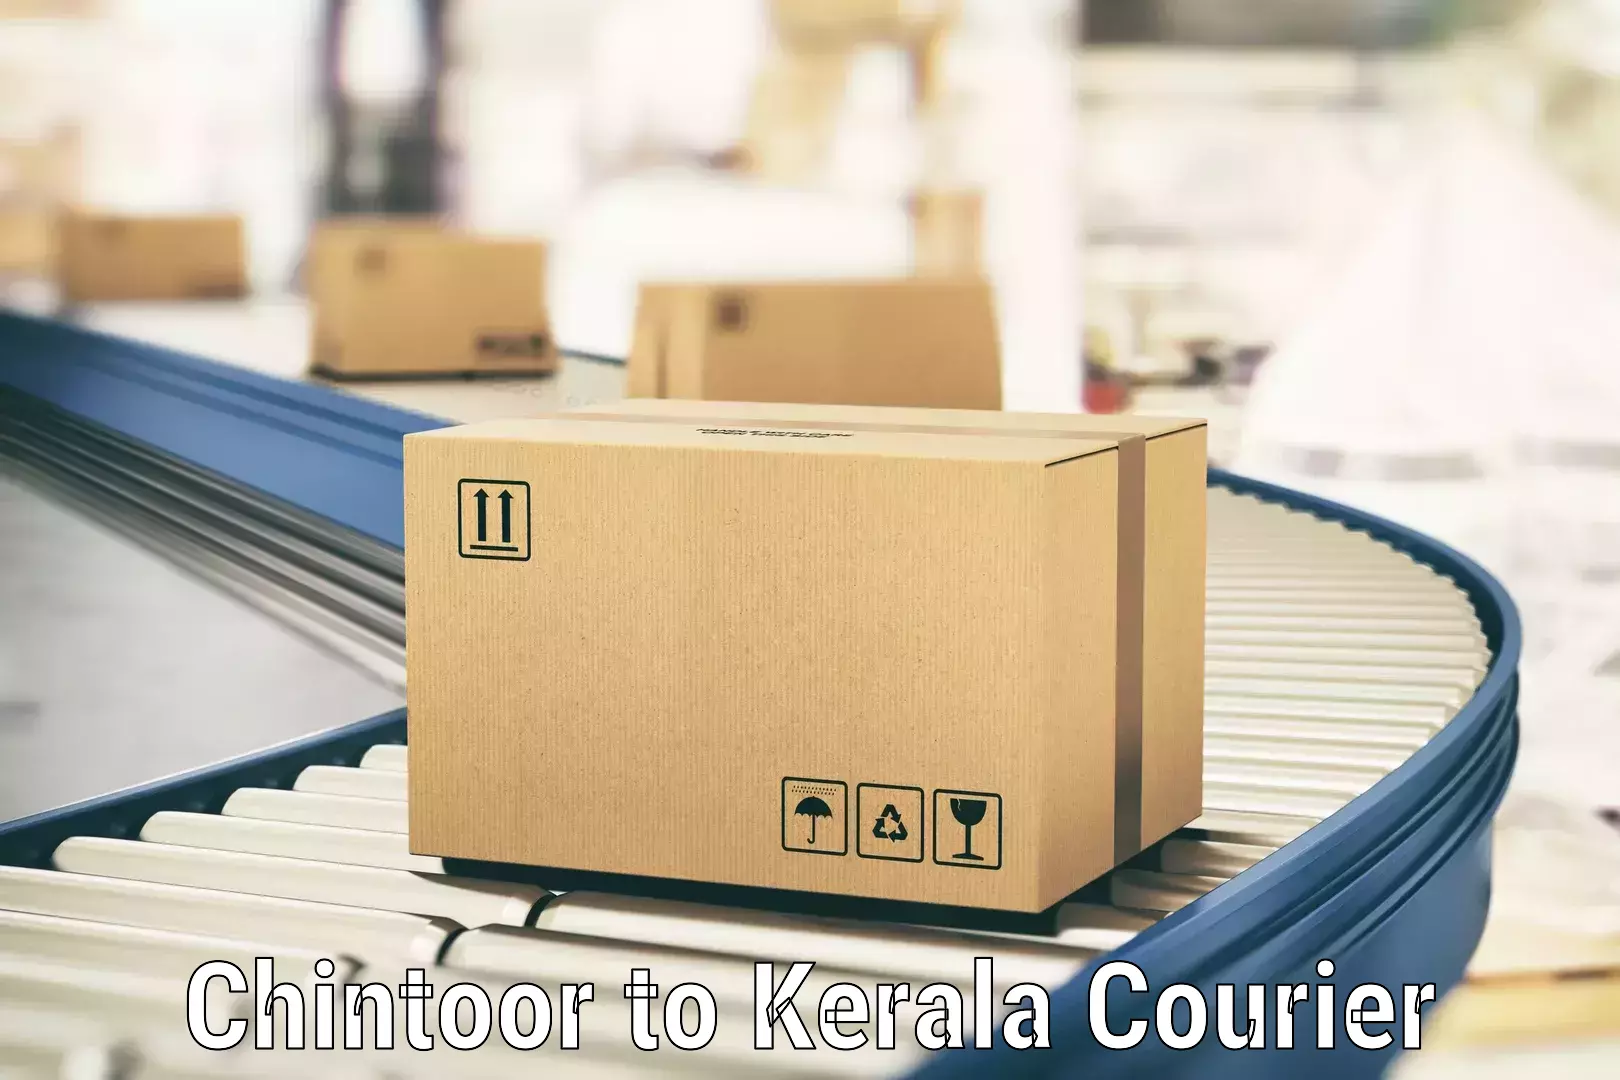 Efficient package consolidation Chintoor to Kannur